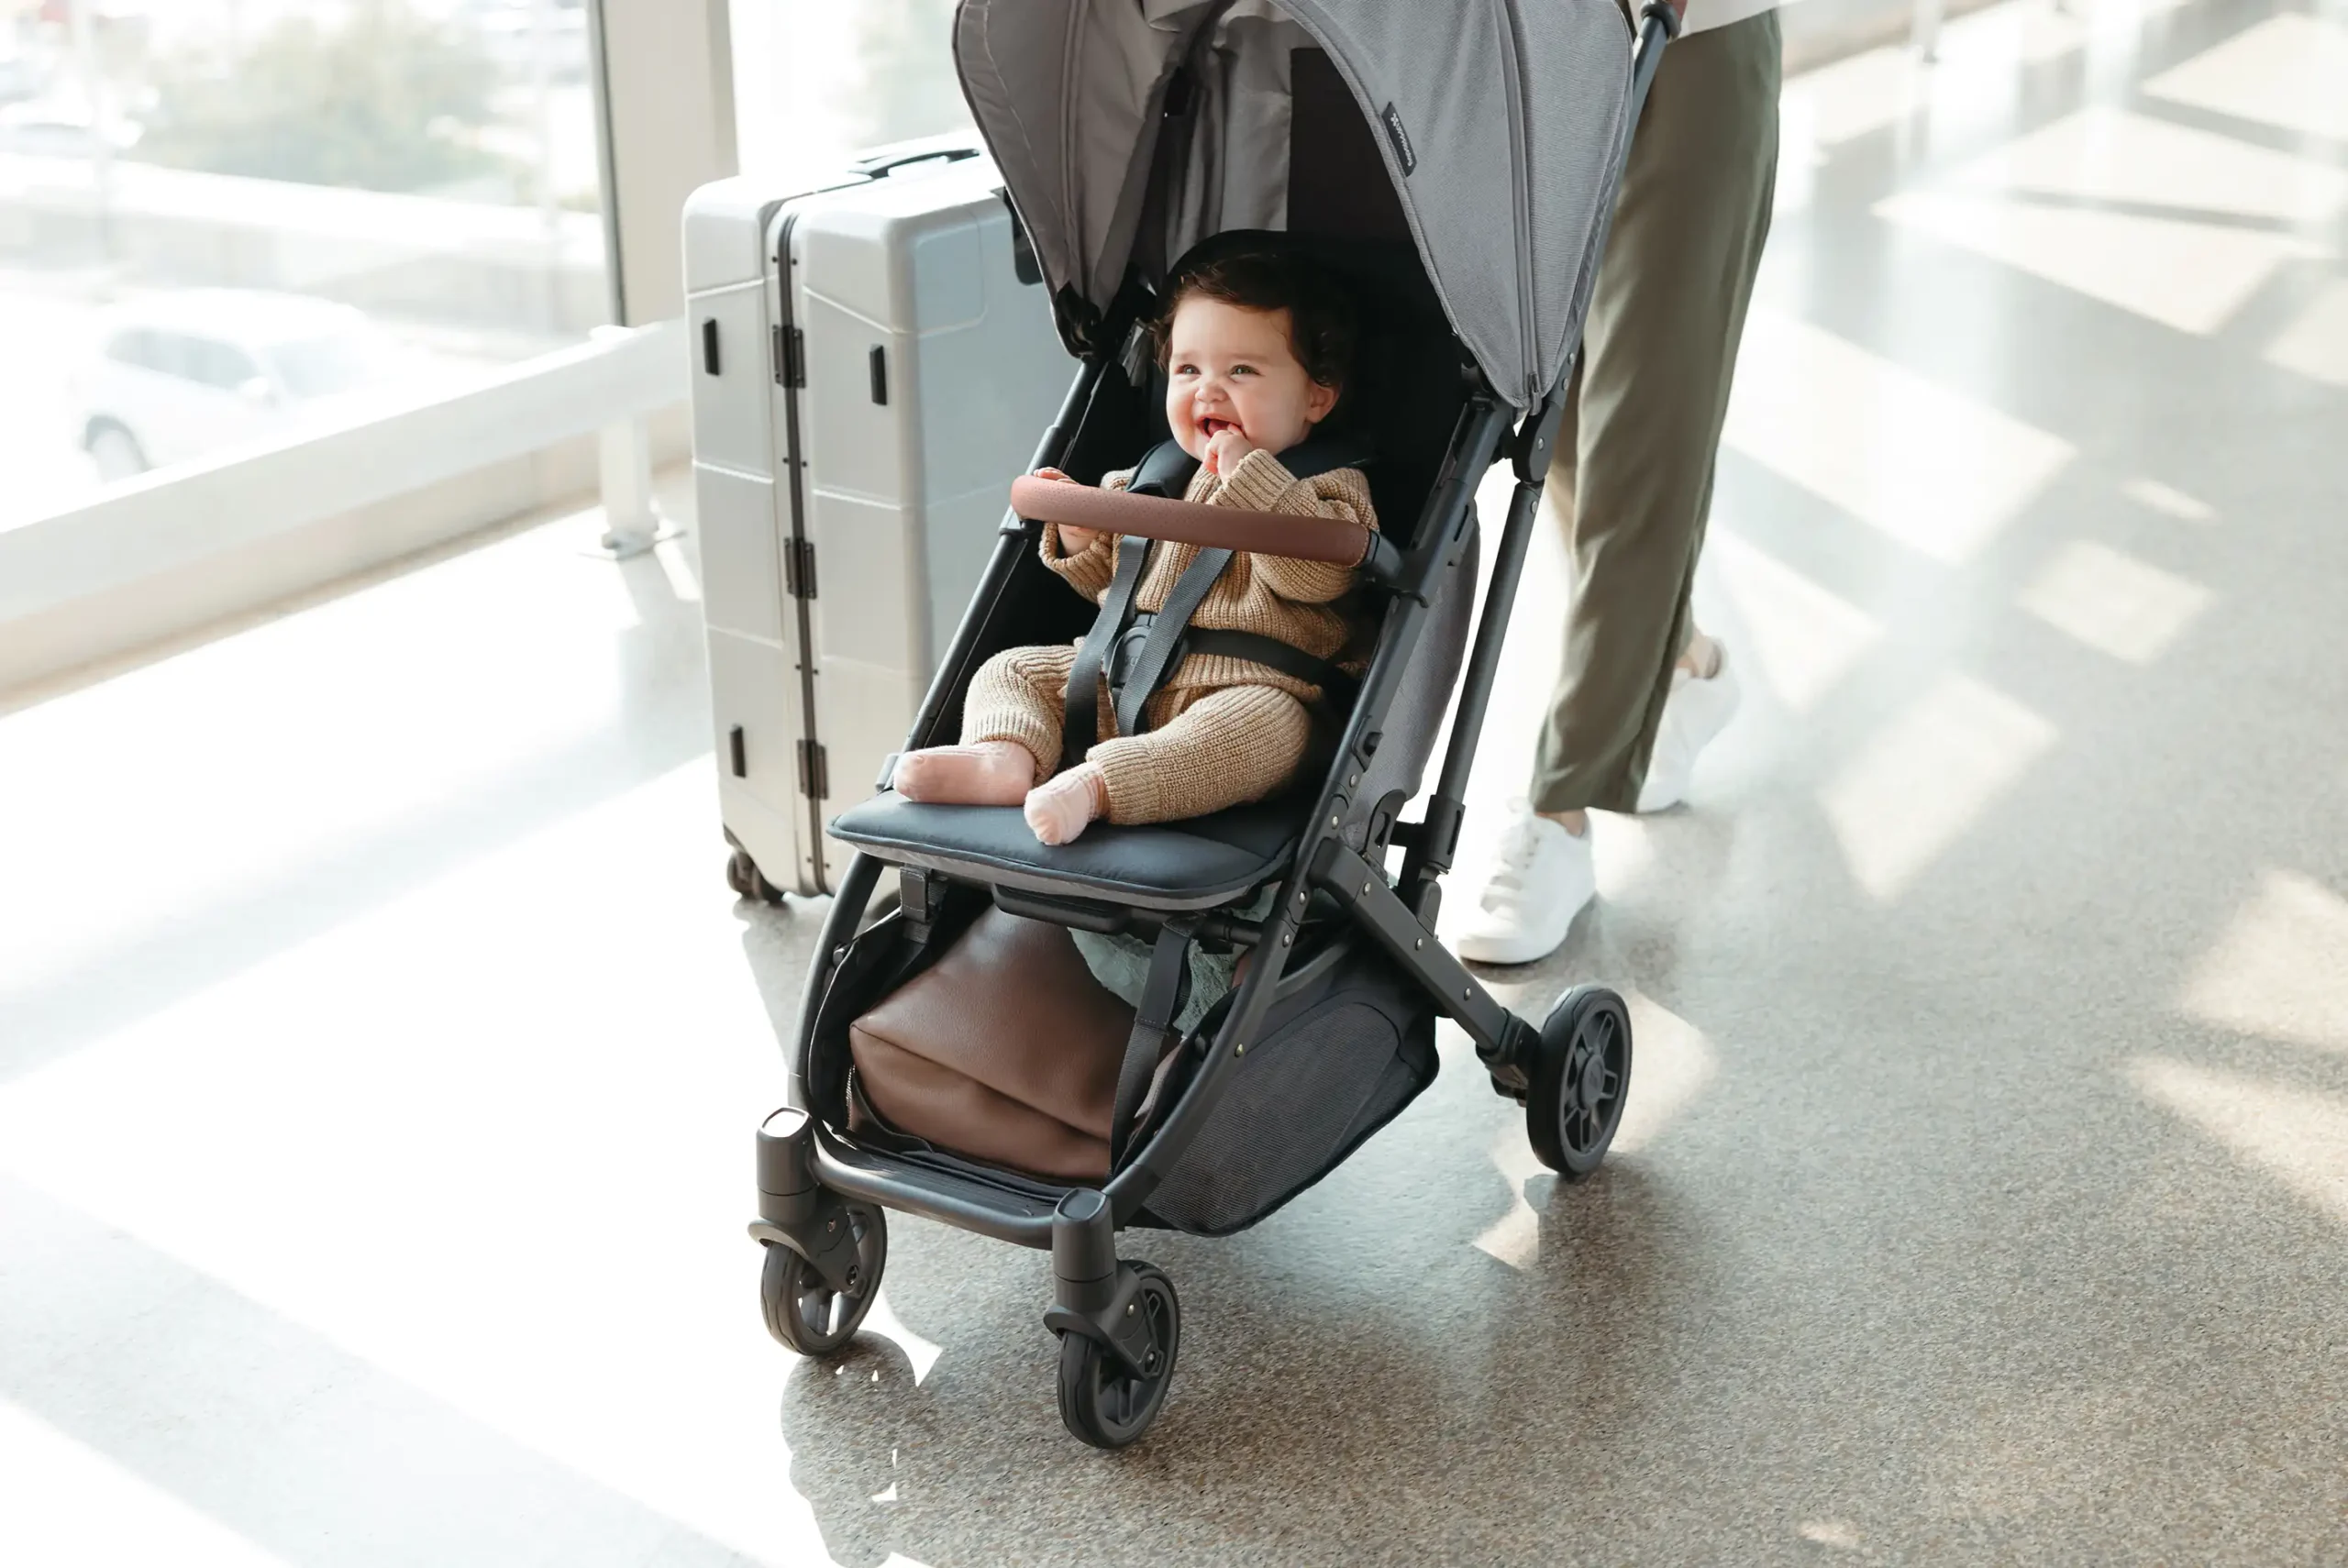 A smiling toddler strolls comfortably in the Minu V2 while her mother's hands to wheel her luggage thanks to the stroller's large, easy access storage basket